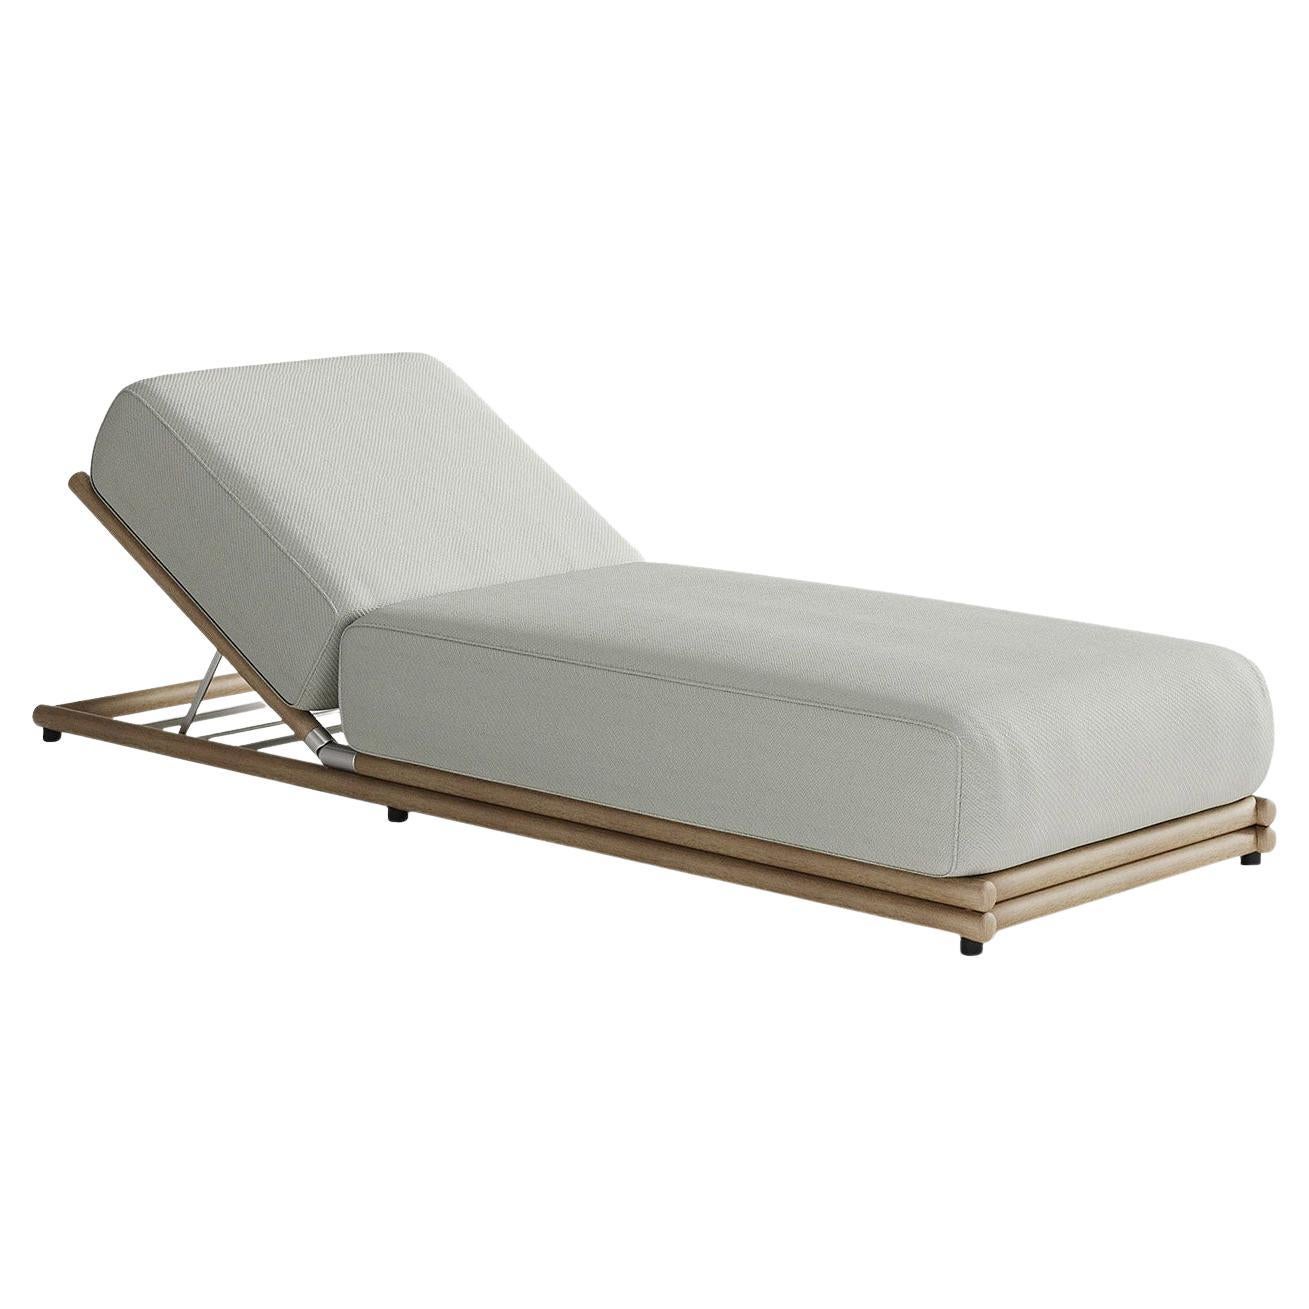 Maxim White Sunbed by Carlo Colombo